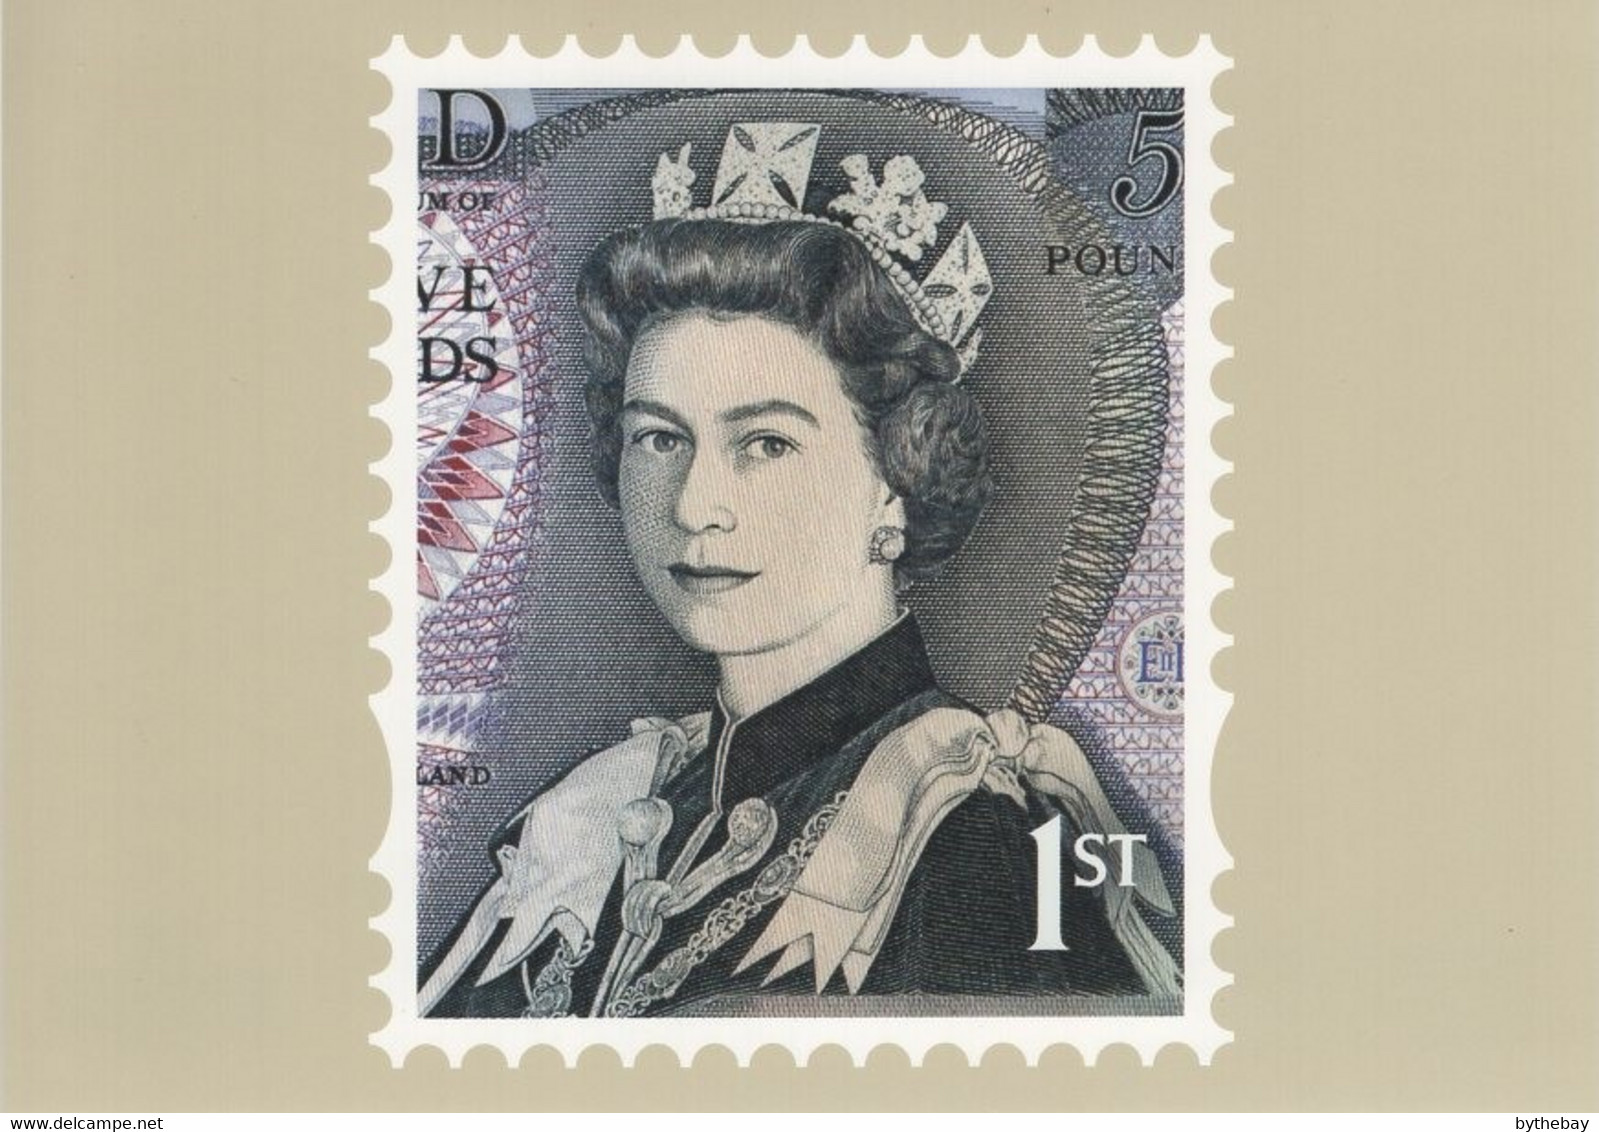 Great Britain 2012 PHQ Card Sc 2996c 1st QEII Image 1971 Bank Note - PHQ Karten